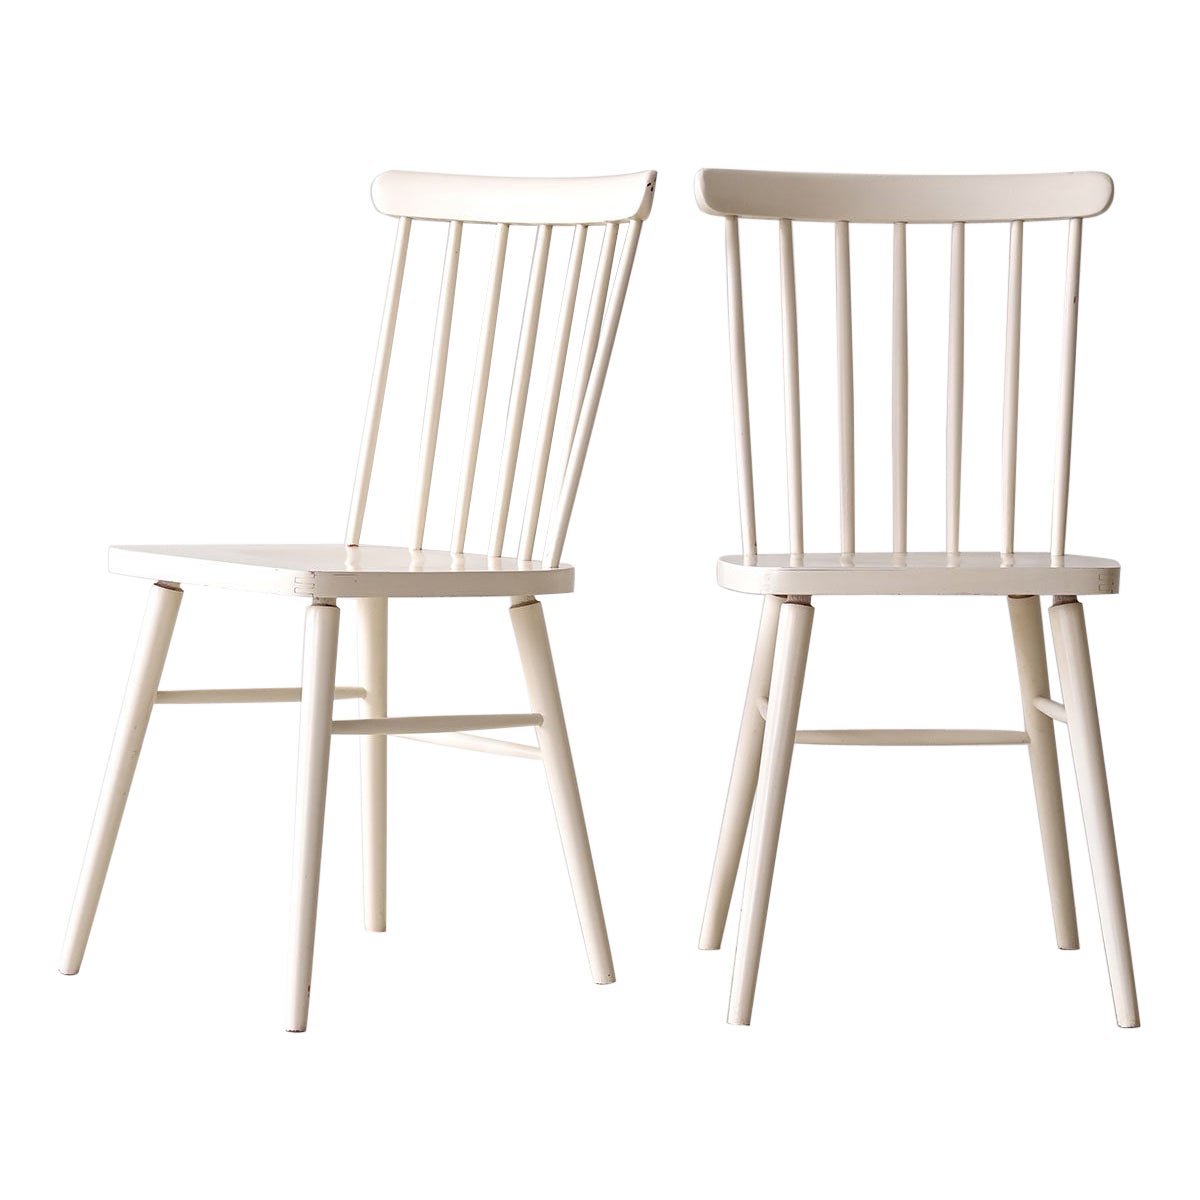 Chaises blanches scandinaves vintage